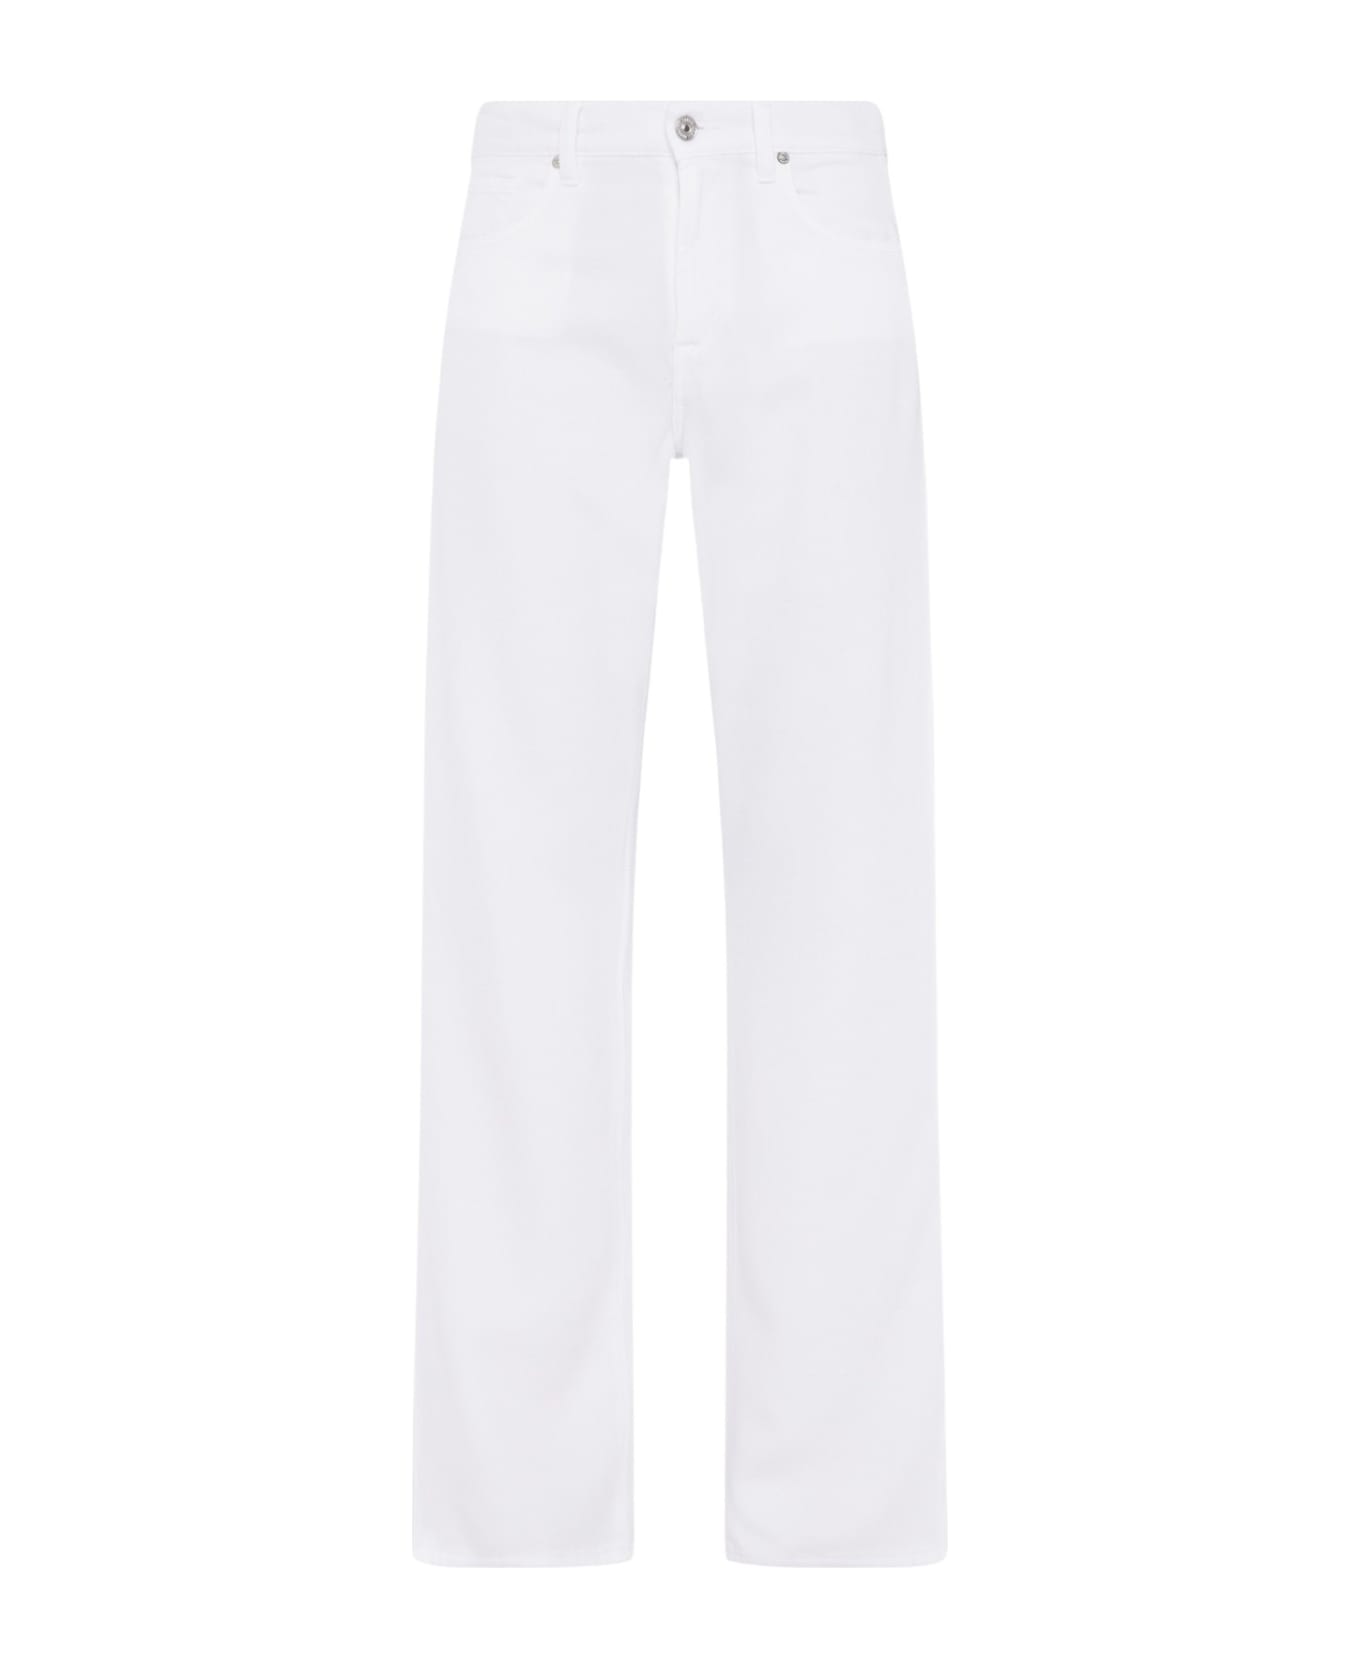 7 For All Mankind Tess Trouser Colored Tencel - White